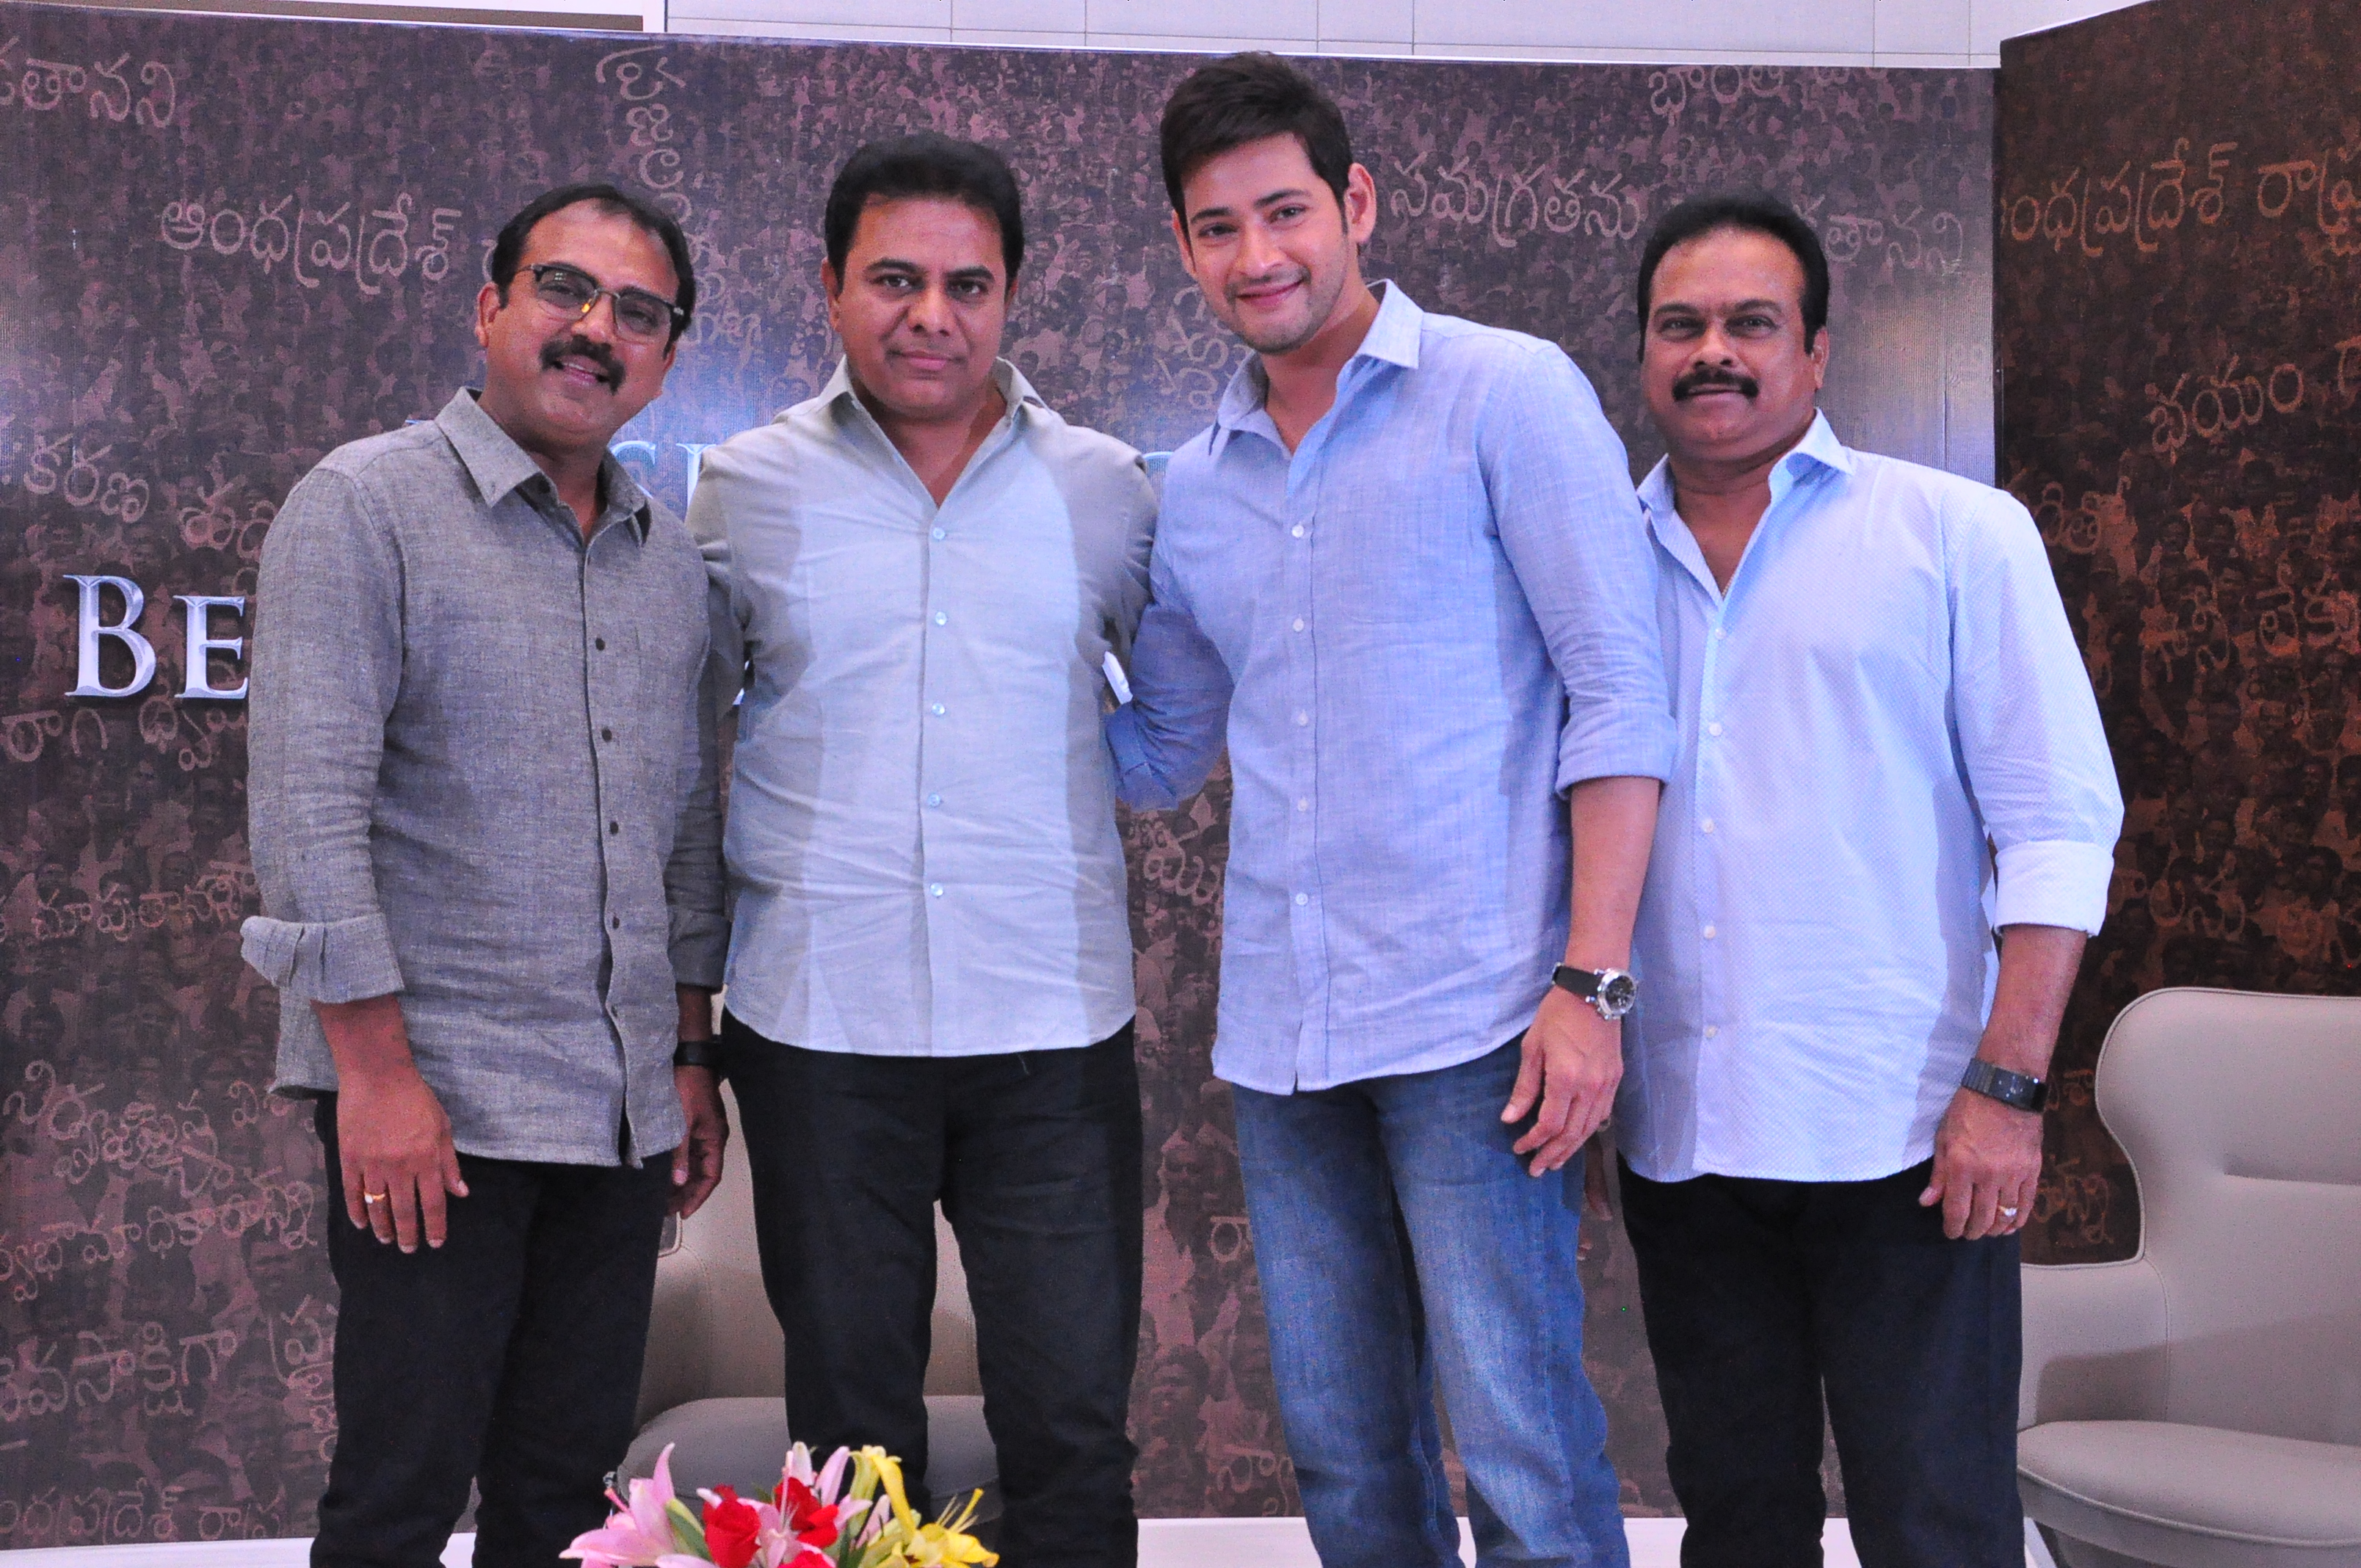 KTR watches Mahesh & Koratala’s Bharat Ane Nenu and also join them for ‘Vision for a Better Tomorrow’